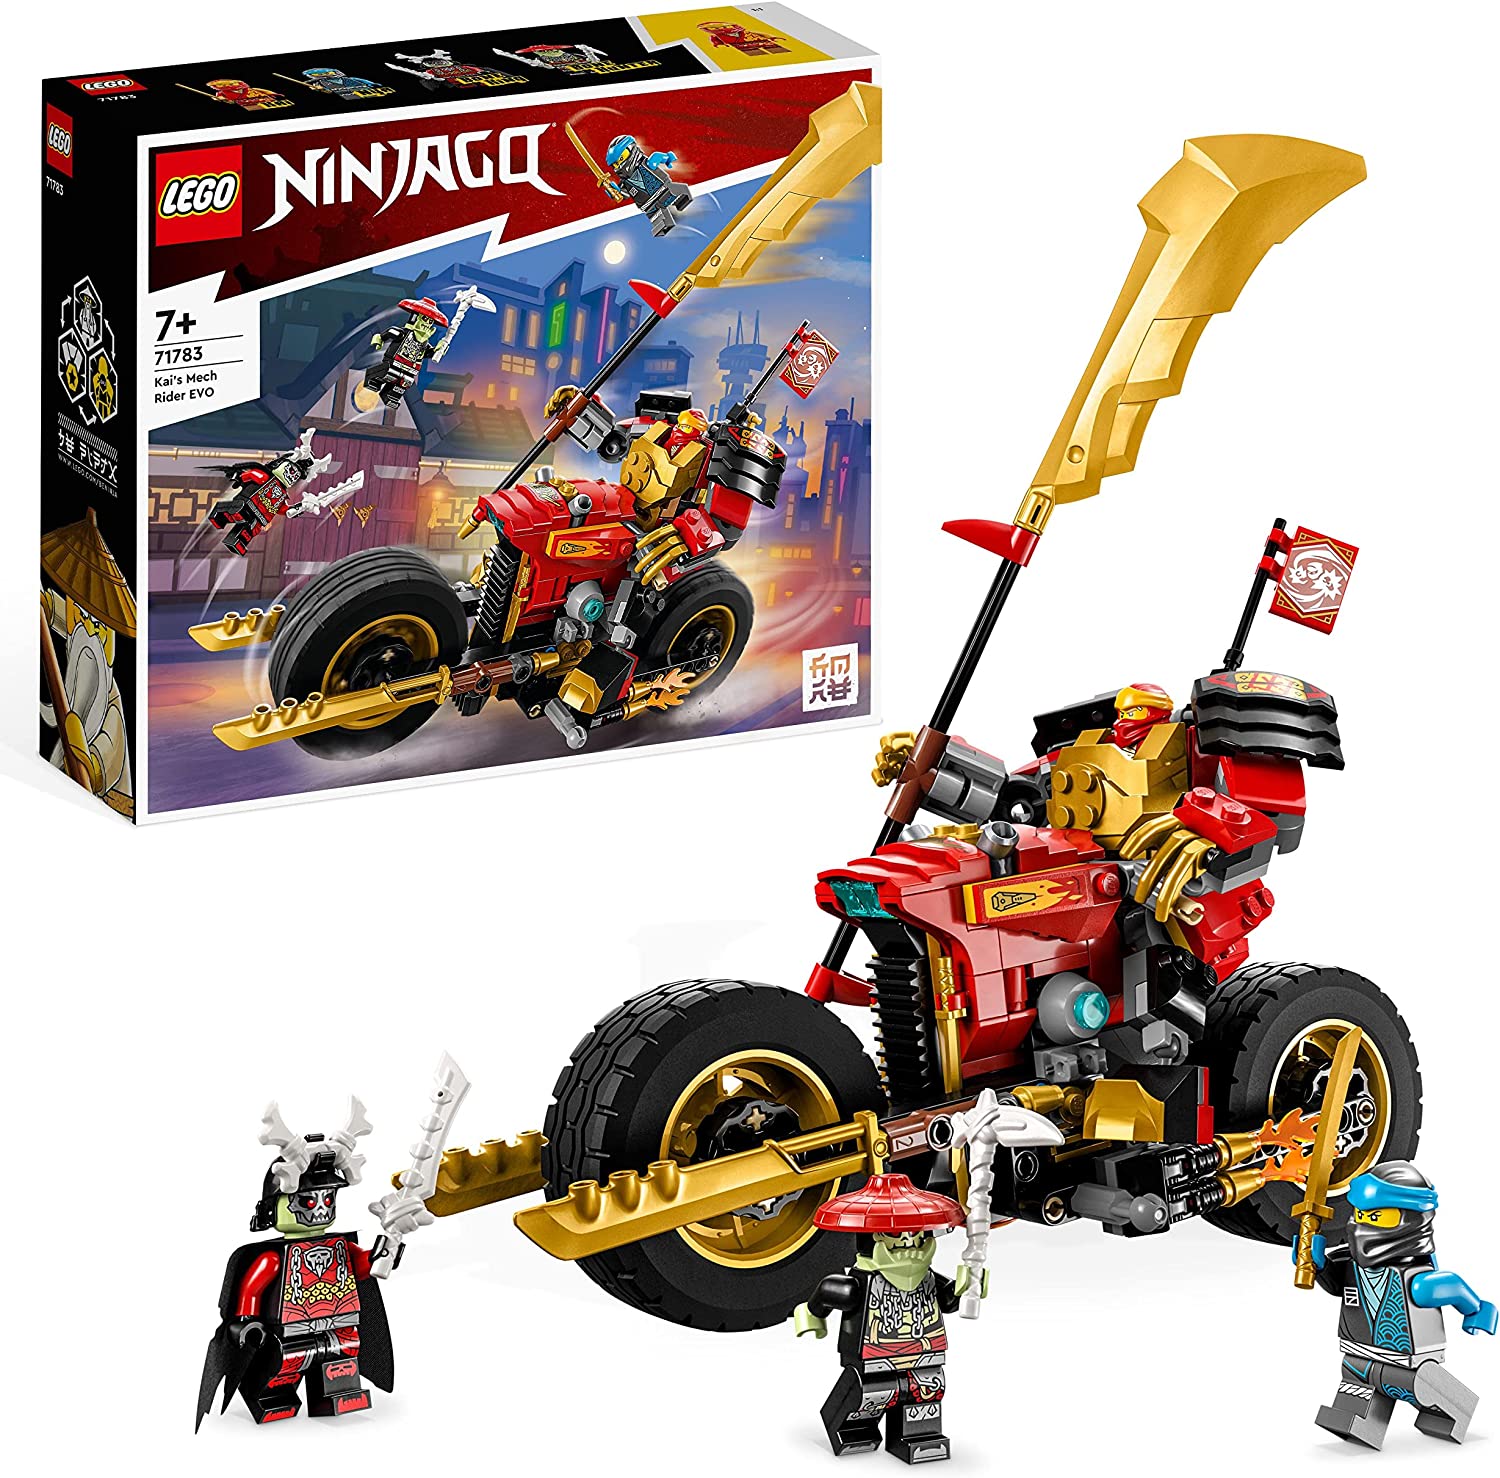 LEGO 71783 NINJAGO Kais Mech-Bike EVO Upgradable Ninja Motorcycle Toy with 2 Mini Figures - Kai and a Skeleton Warrior for Children from 7 Years